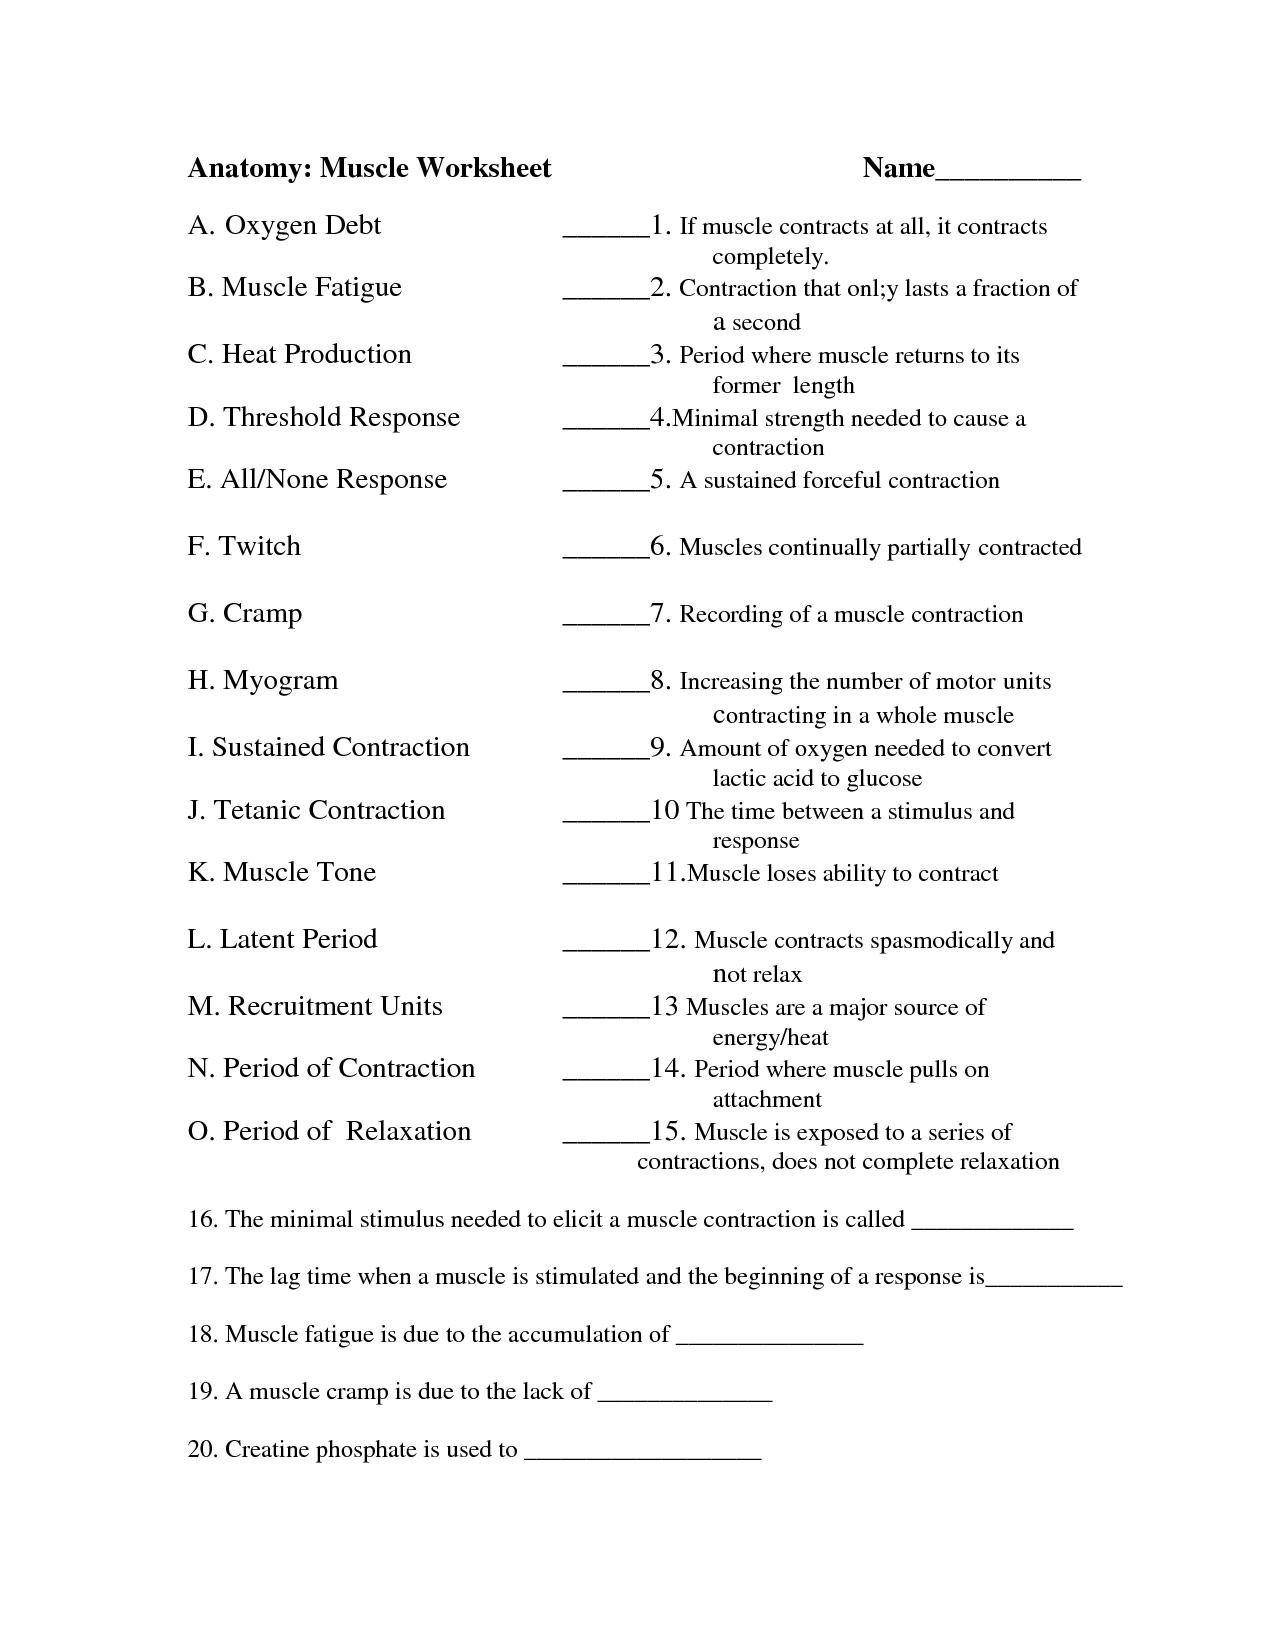 Anatomy And Physiology Muscle Worksheets Anatomy And Physiology 